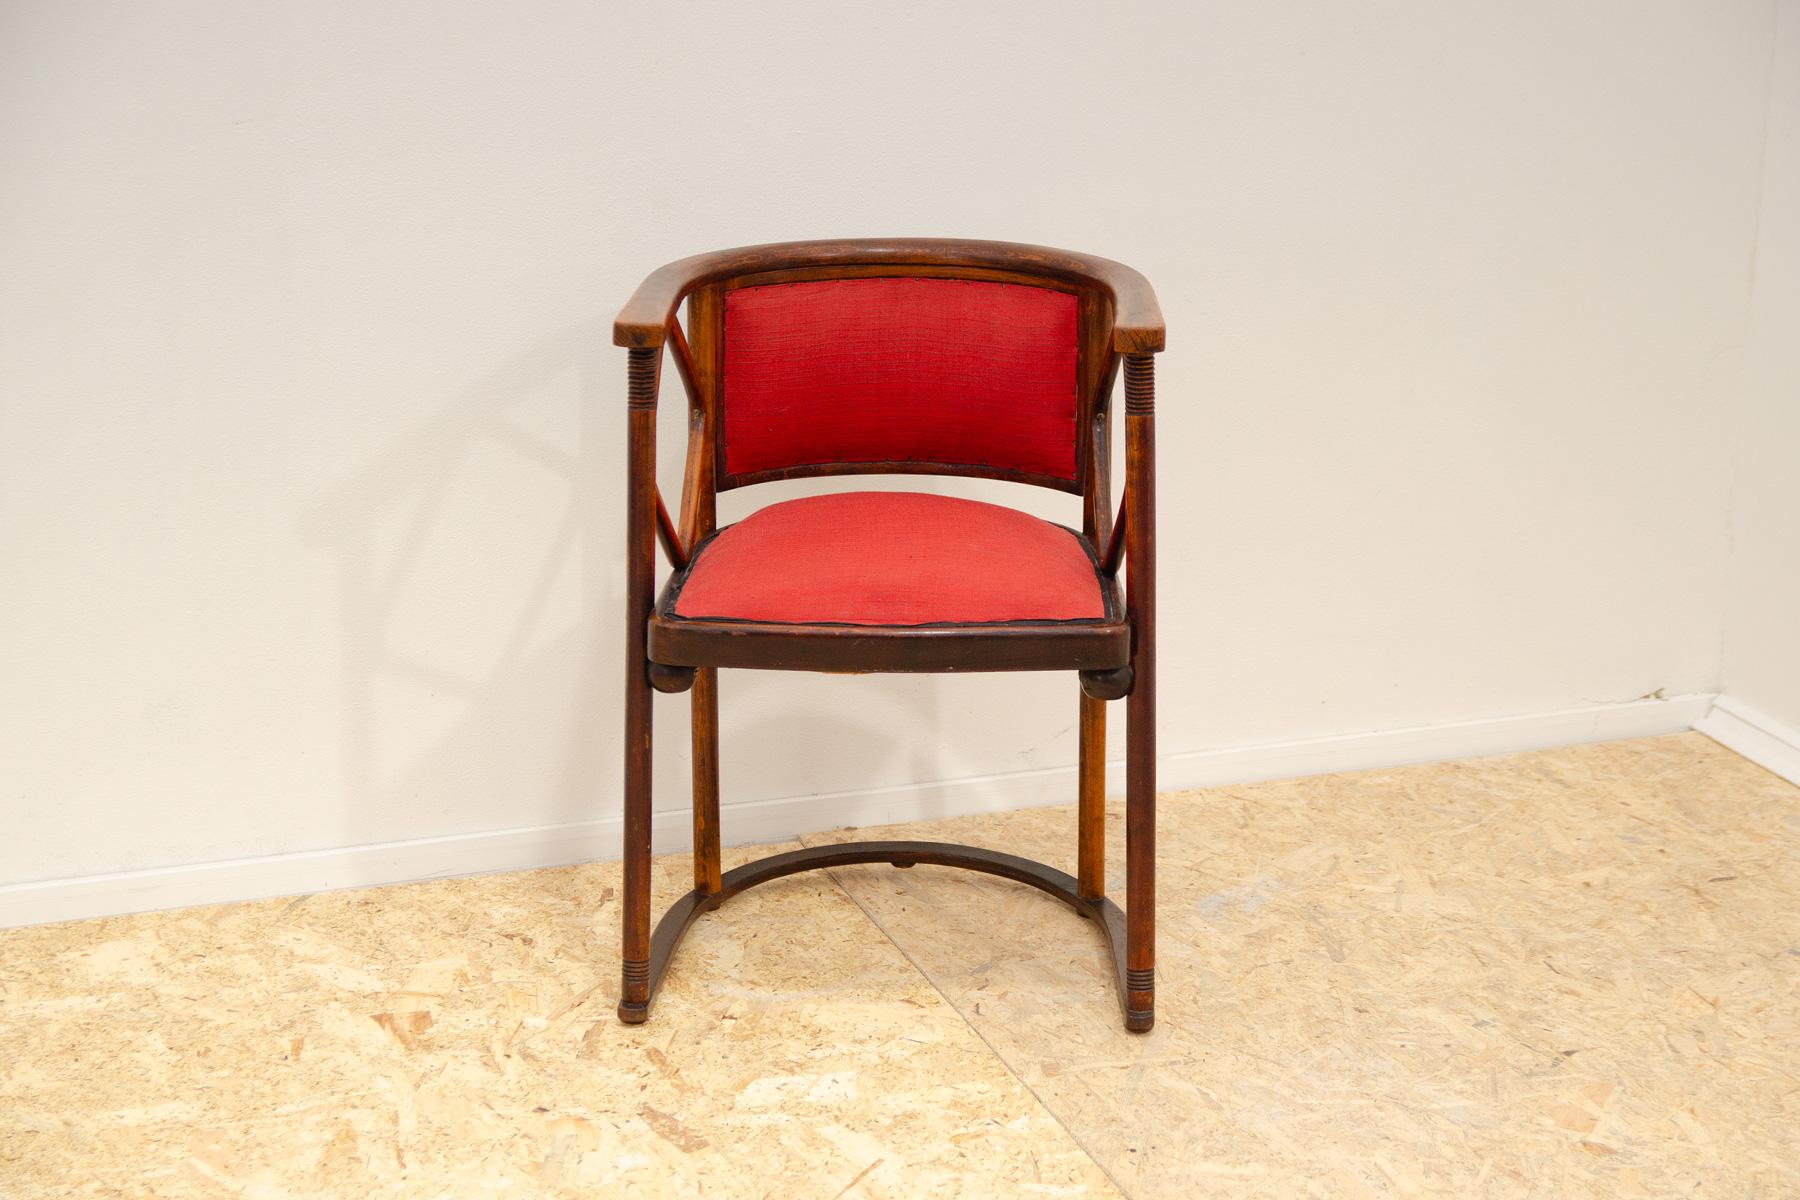 Vienna Secession Josef Hoffmann bentwood chair from the Fledermaus cabaret, 1905 For Sale